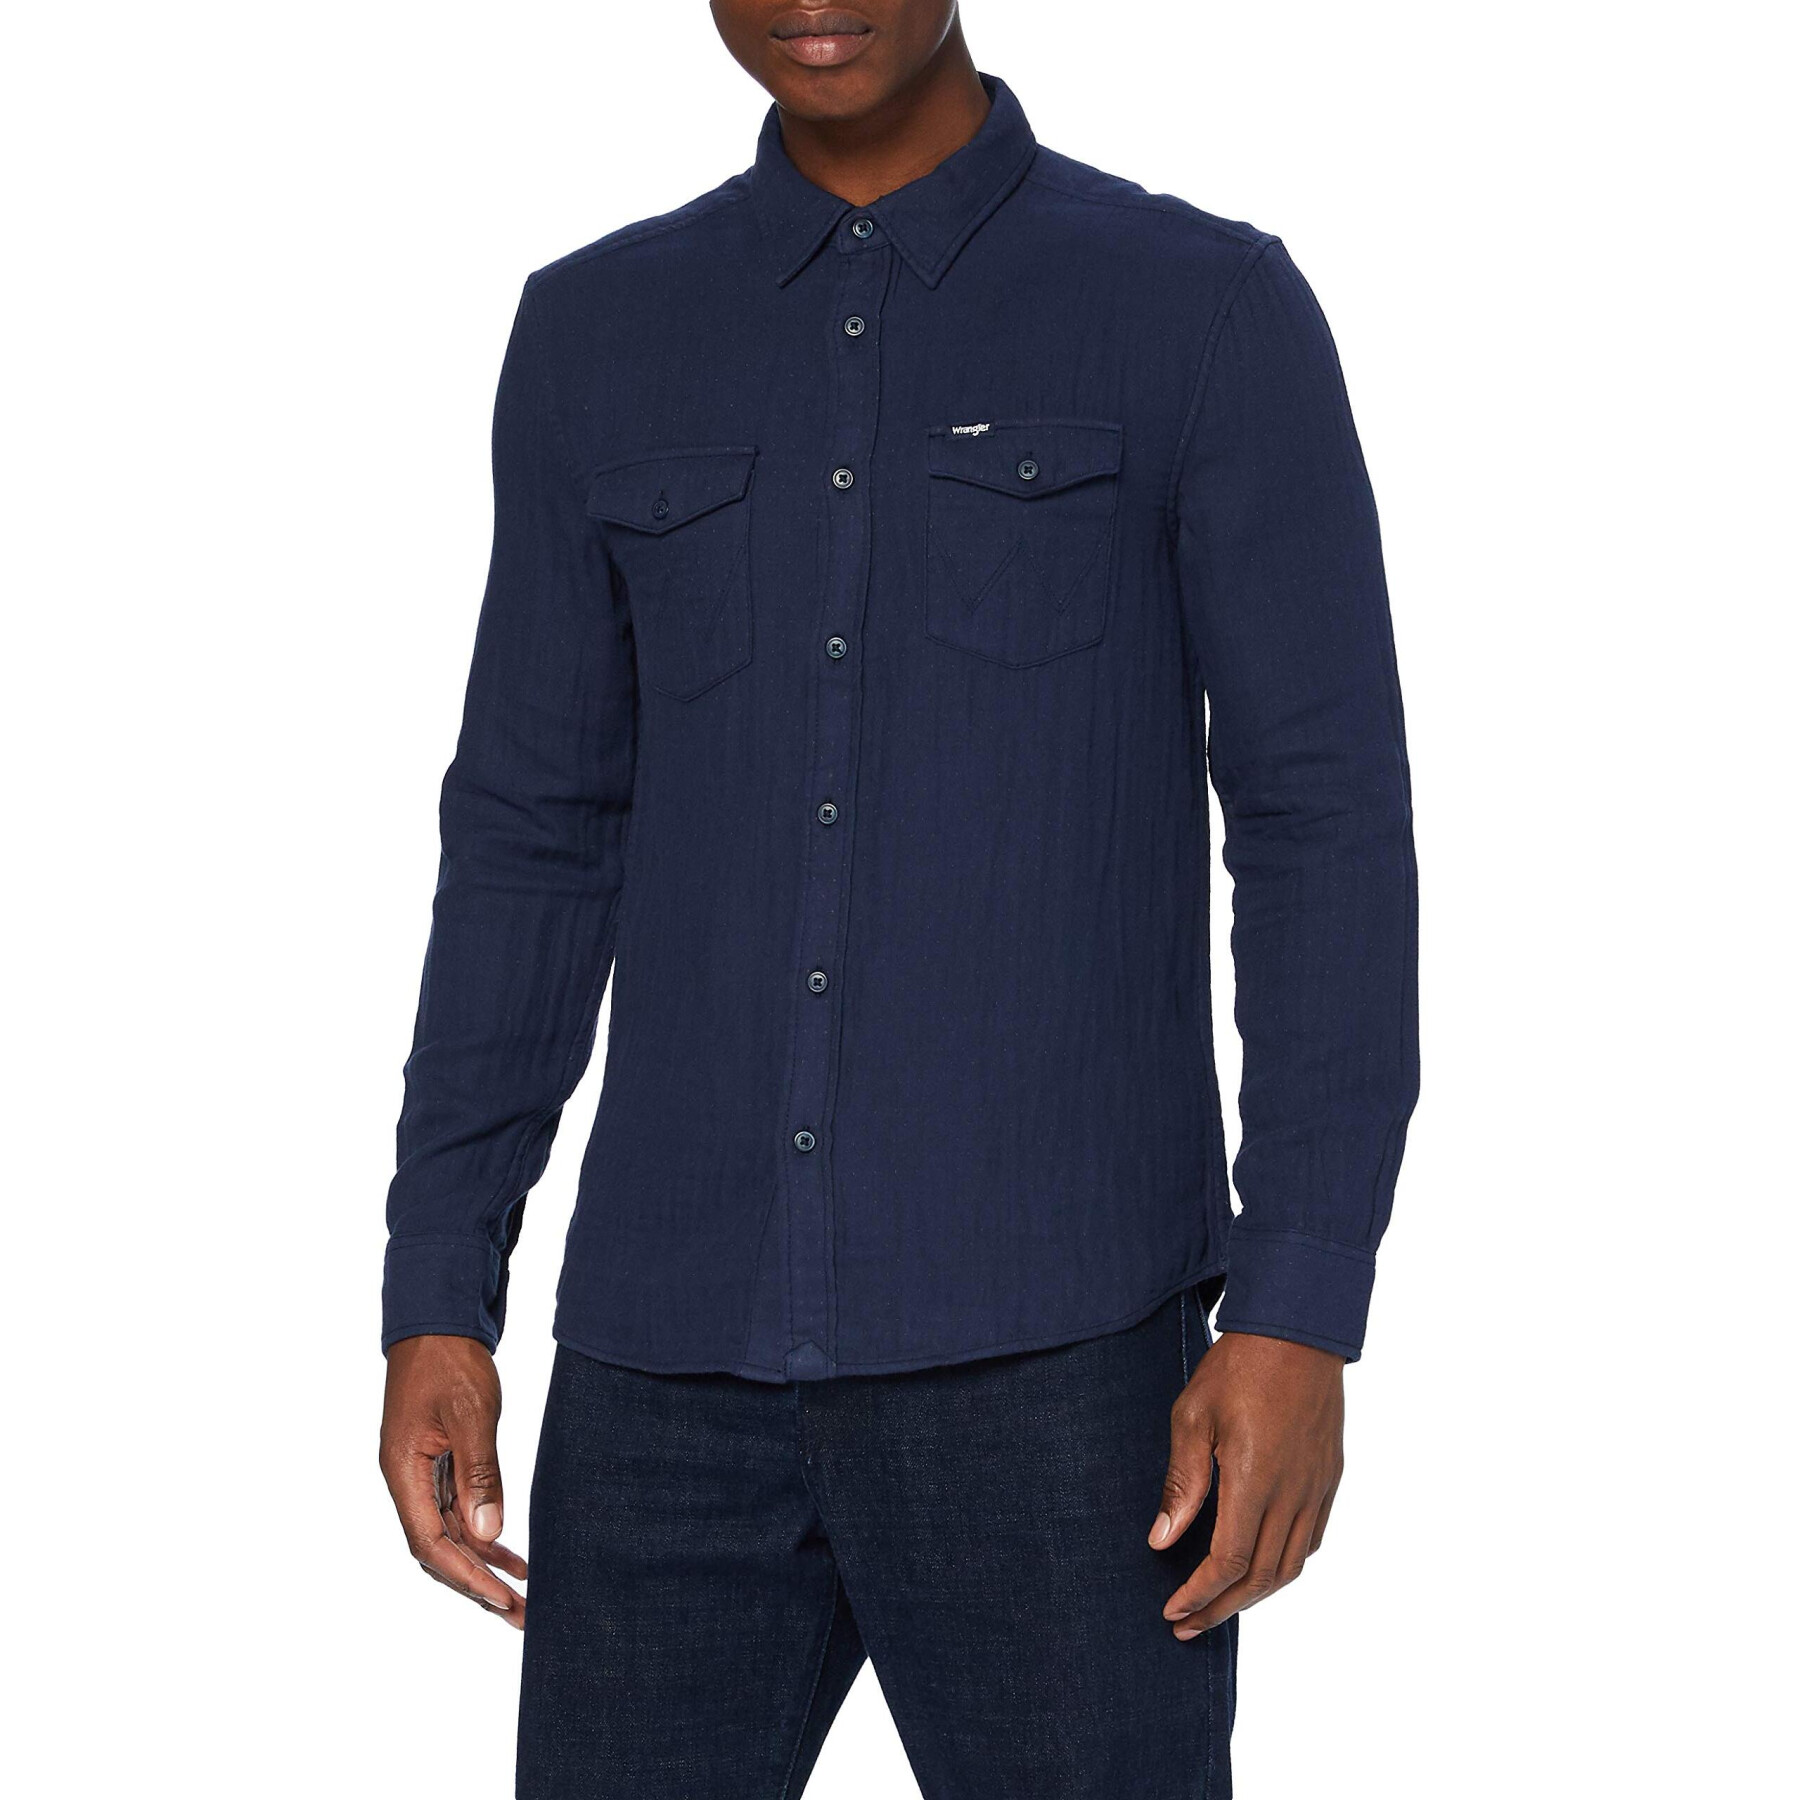 Wranger Shirt with navy pockets